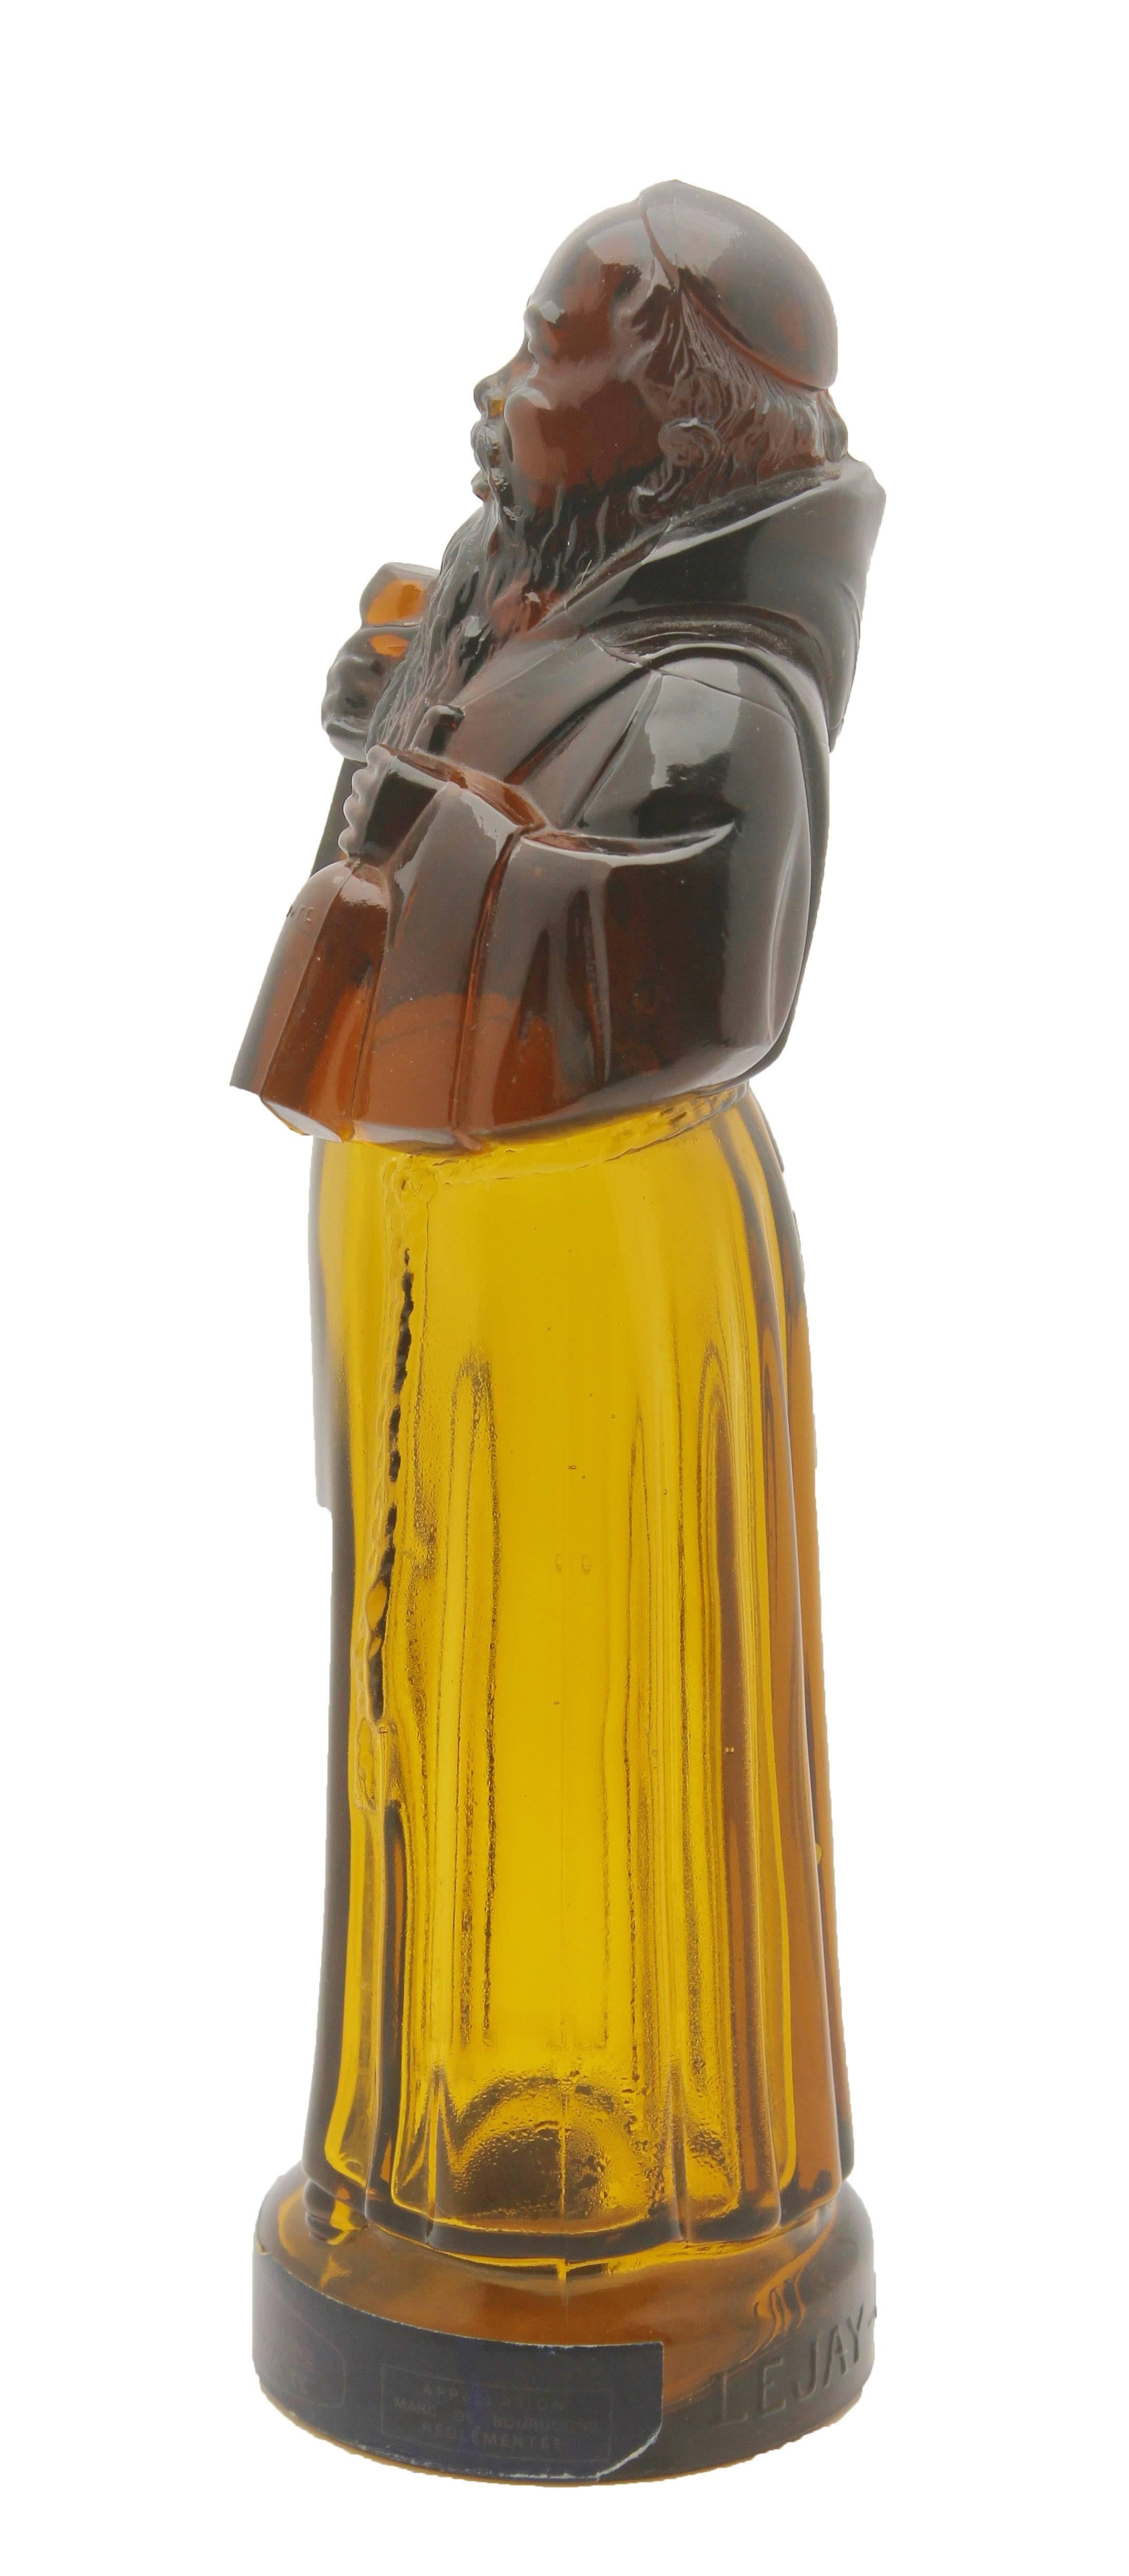 This liquor bottle or decanter was designed for 'Le Moine Legendaire' a brand owned by Lejay Lagoute .
This is now a rare survivor with the original label on the bottle that says Lejay-Lagoute Dijon-France, and the words Lejay-Lagoute pressed into